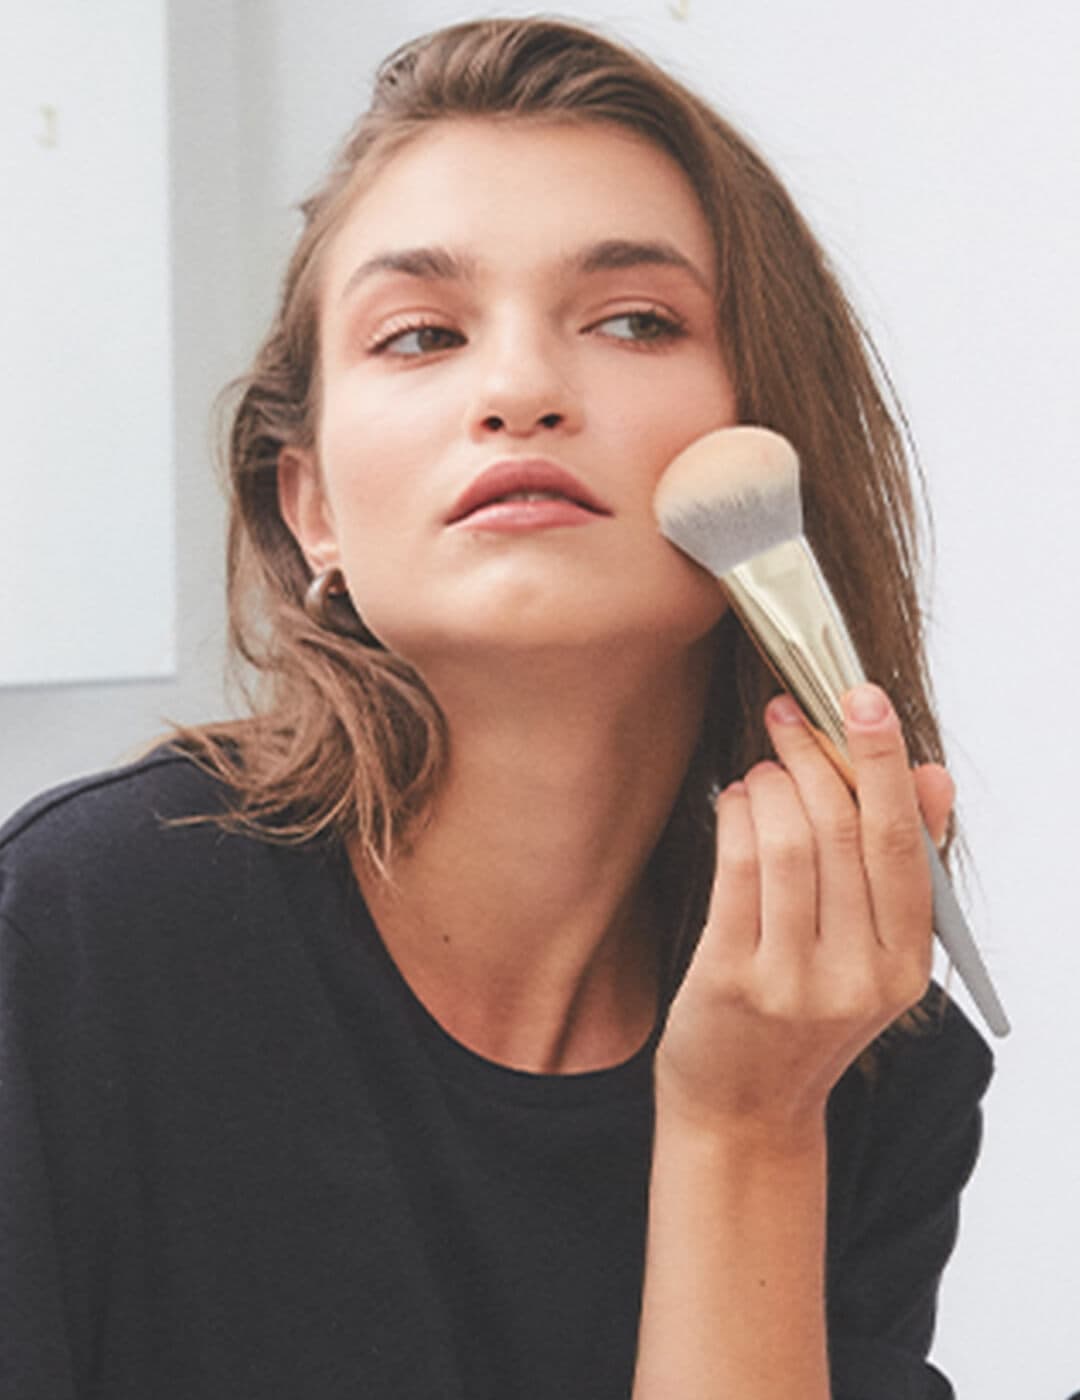 A photo of a woman wearing black top holding a powder brush pressed against her cheeks